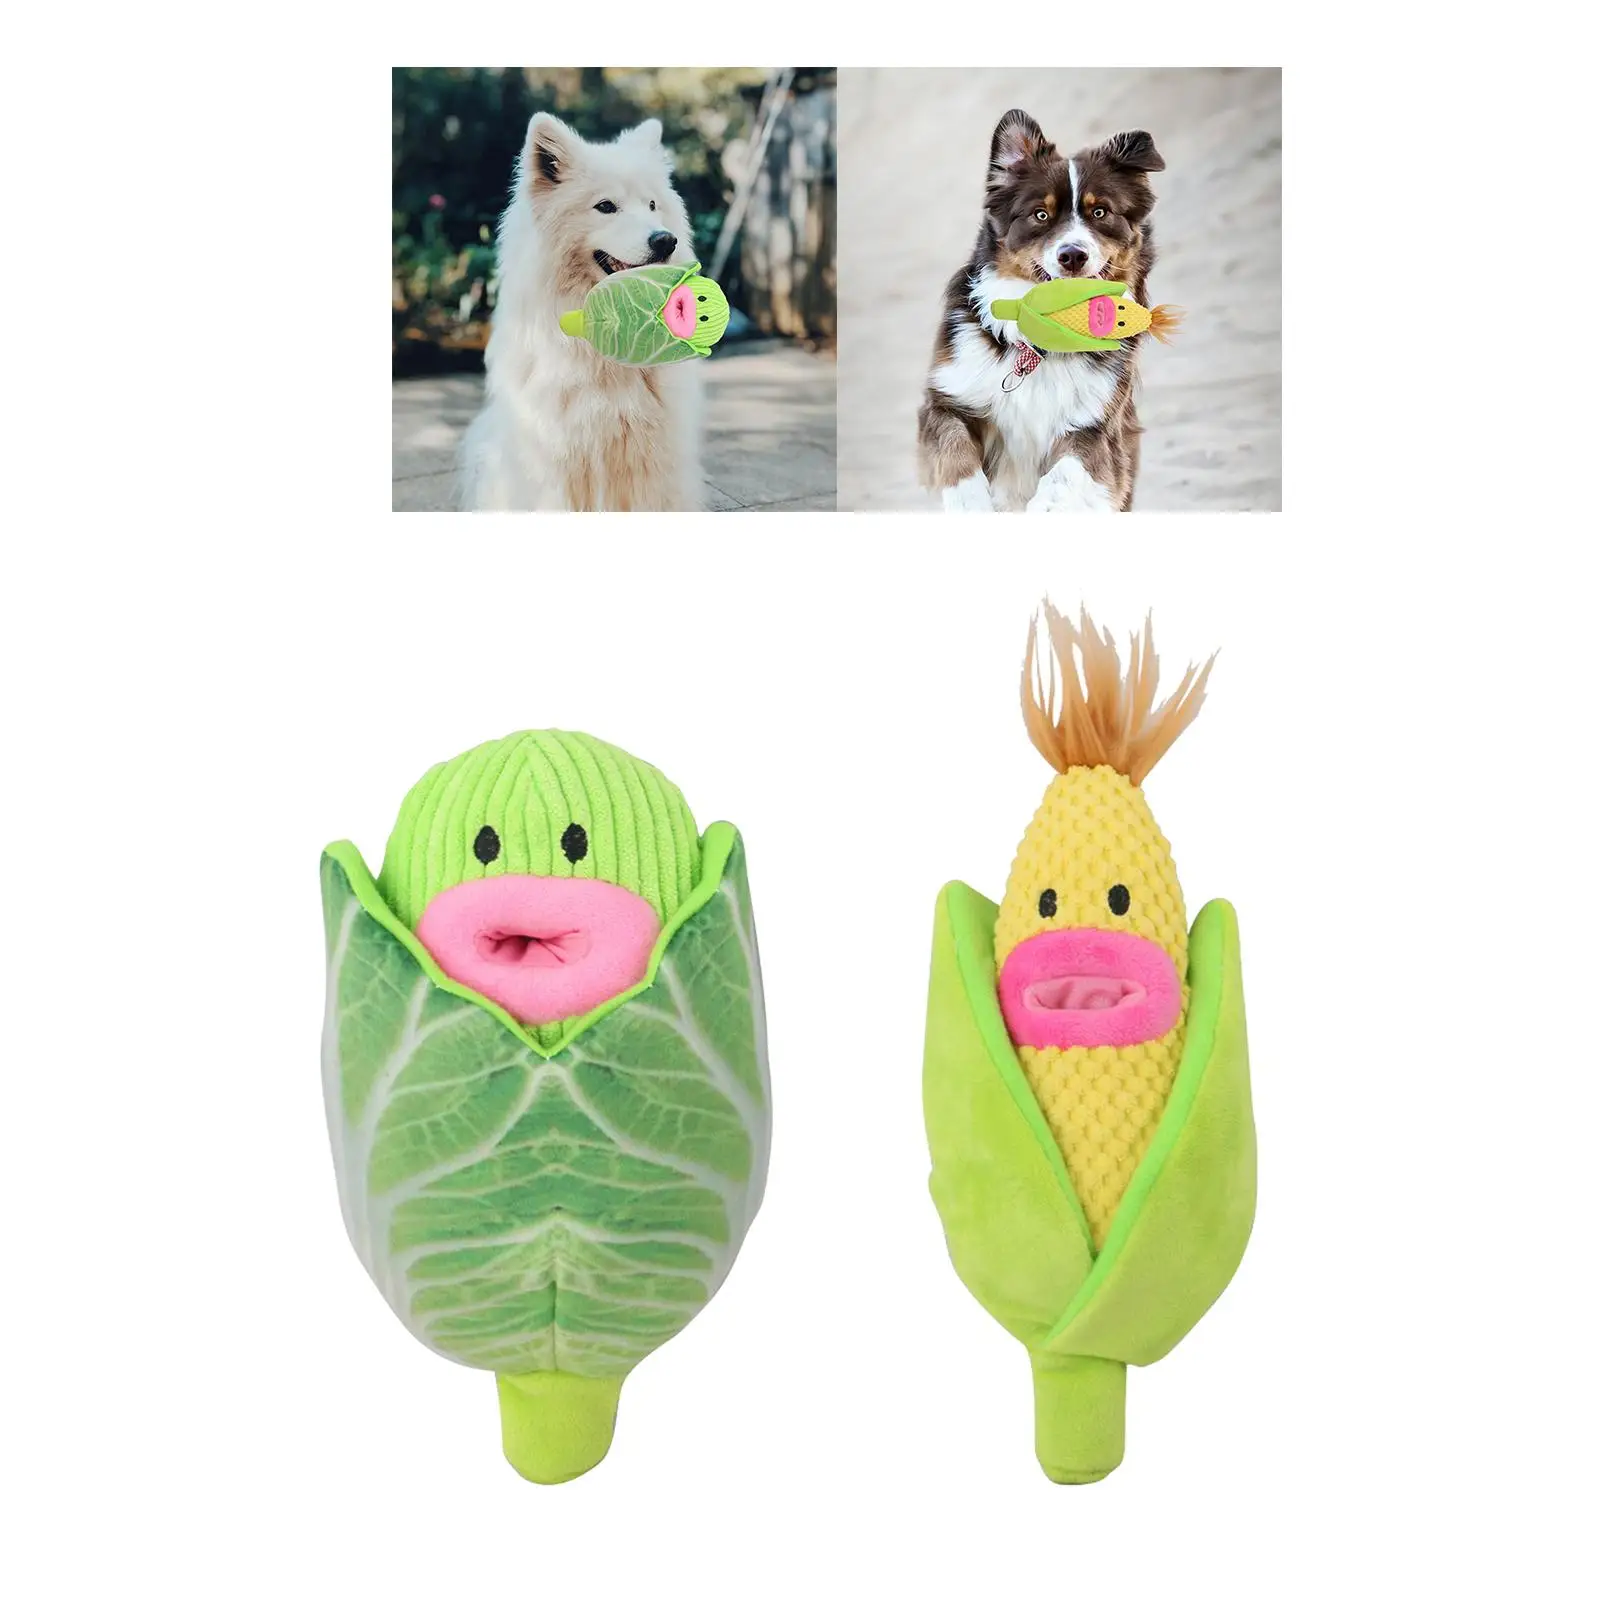 Cute Dog Toy Squeaker Pet Chew Food Dispenser Interactive Stuffed Chew Toy for Gift Aggressive Chewers Animals Treat Training